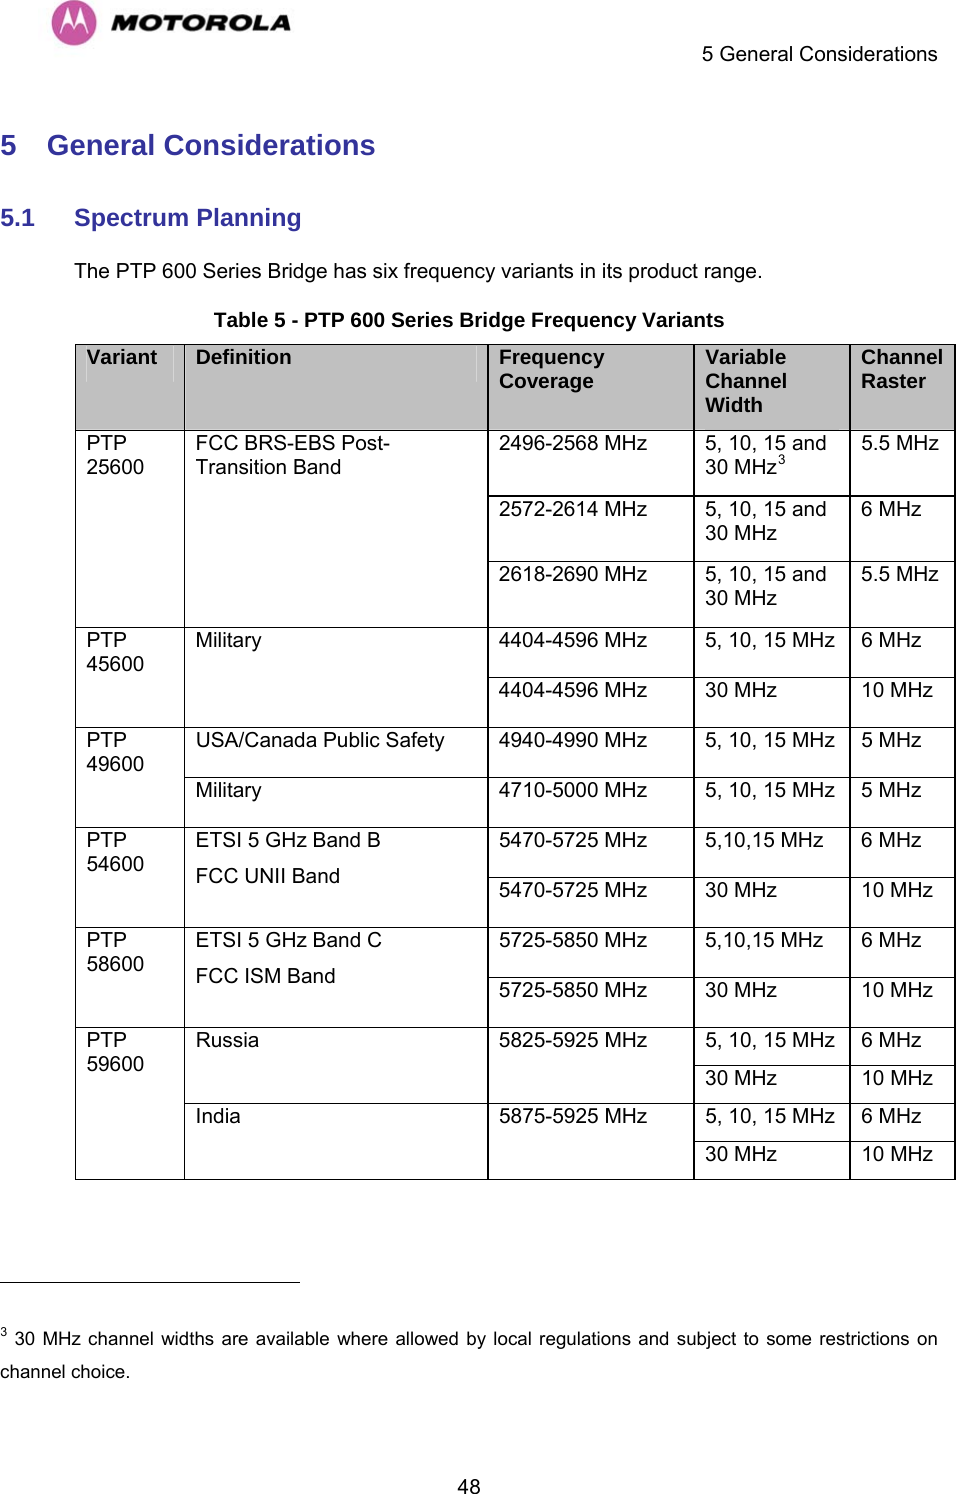    5 General Considerations  485  General Considerations  5.1  Spectrum Planning  The PTP 600 Series Bridge has six frequency variants in its product range.  Table 5 - PTP 600 Series Bridge Frequency Variants Variant  Definition  Frequency Coverage  Variable Channel Width Channel Raster 2496-2568 MHz  5, 10, 15 and 30 MHz3 5.5 MHz 2572-2614 MHz  5, 10, 15 and 30 MHz 6 MHz PTP 25600 FCC BRS-EBS Post-Transition Band 2618-2690 MHz  5, 10, 15 and 30 MHz 5.5 MHz 4404-4596 MHz  5, 10, 15 MHz  6 MHz PTP 45600 Military 4404-4596 MHz  30 MHz  10 MHz USA/Canada Public Safety  4940-4990 MHz  5, 10, 15 MHz  5 MHz PTP 49600 Military  4710-5000 MHz  5, 10, 15 MHz  5 MHz 5470-5725 MHz  5,10,15 MHz   6 MHz PTP 54600 ETSI 5 GHz Band B FCC UNII Band  5470-5725 MHz  30 MHz  10 MHz 5725-5850 MHz  5,10,15 MHz  6 MHz PTP 58600 ETSI 5 GHz Band C FCC ISM Band  5725-5850 MHz  30 MHz  10 MHz 5, 10, 15 MHz  6 MHz Russia 5825-5925 MHz 30 MHz  10 MHz 5, 10, 15 MHz  6 MHz PTP 59600 India 5875-5925 MHz 30 MHz  10 MHz                                                        3 30 MHz channel widths are available where allowed by local regulations and subject to some restrictions on channel choice. 